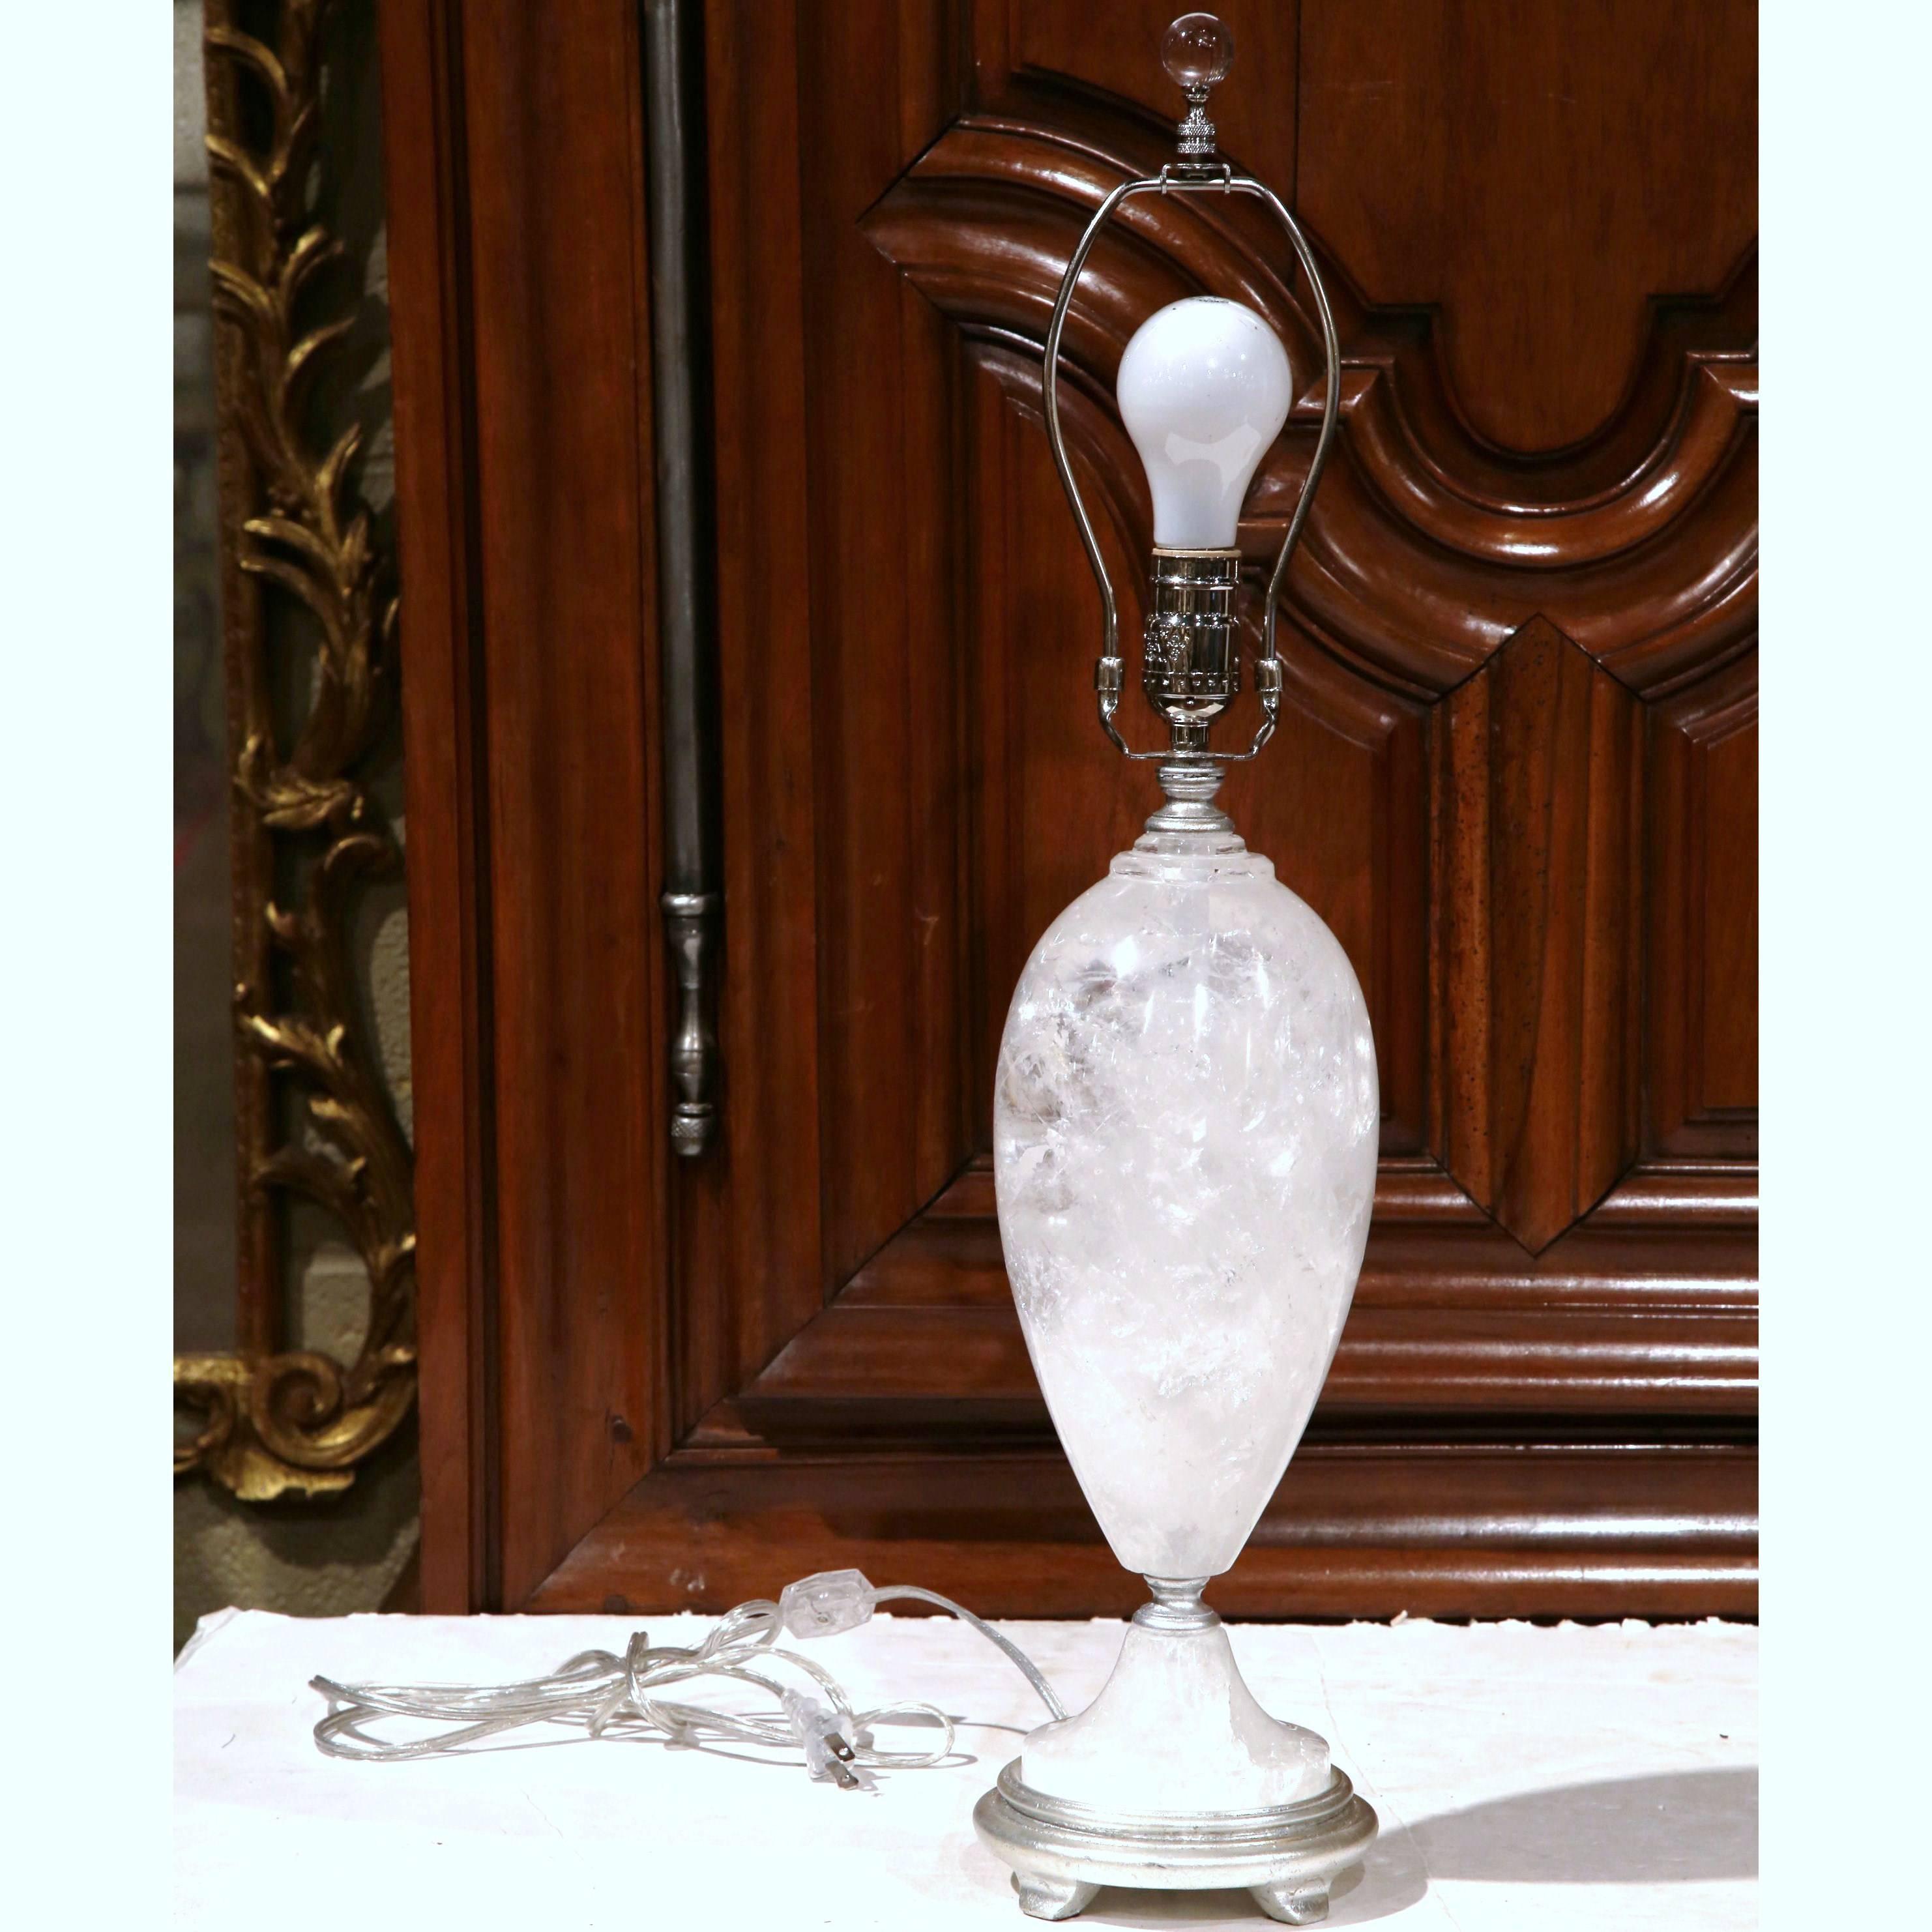 Hand-Carved Pair of Rock Crystal Table Lamps from Brazil with Round Shades and Finials